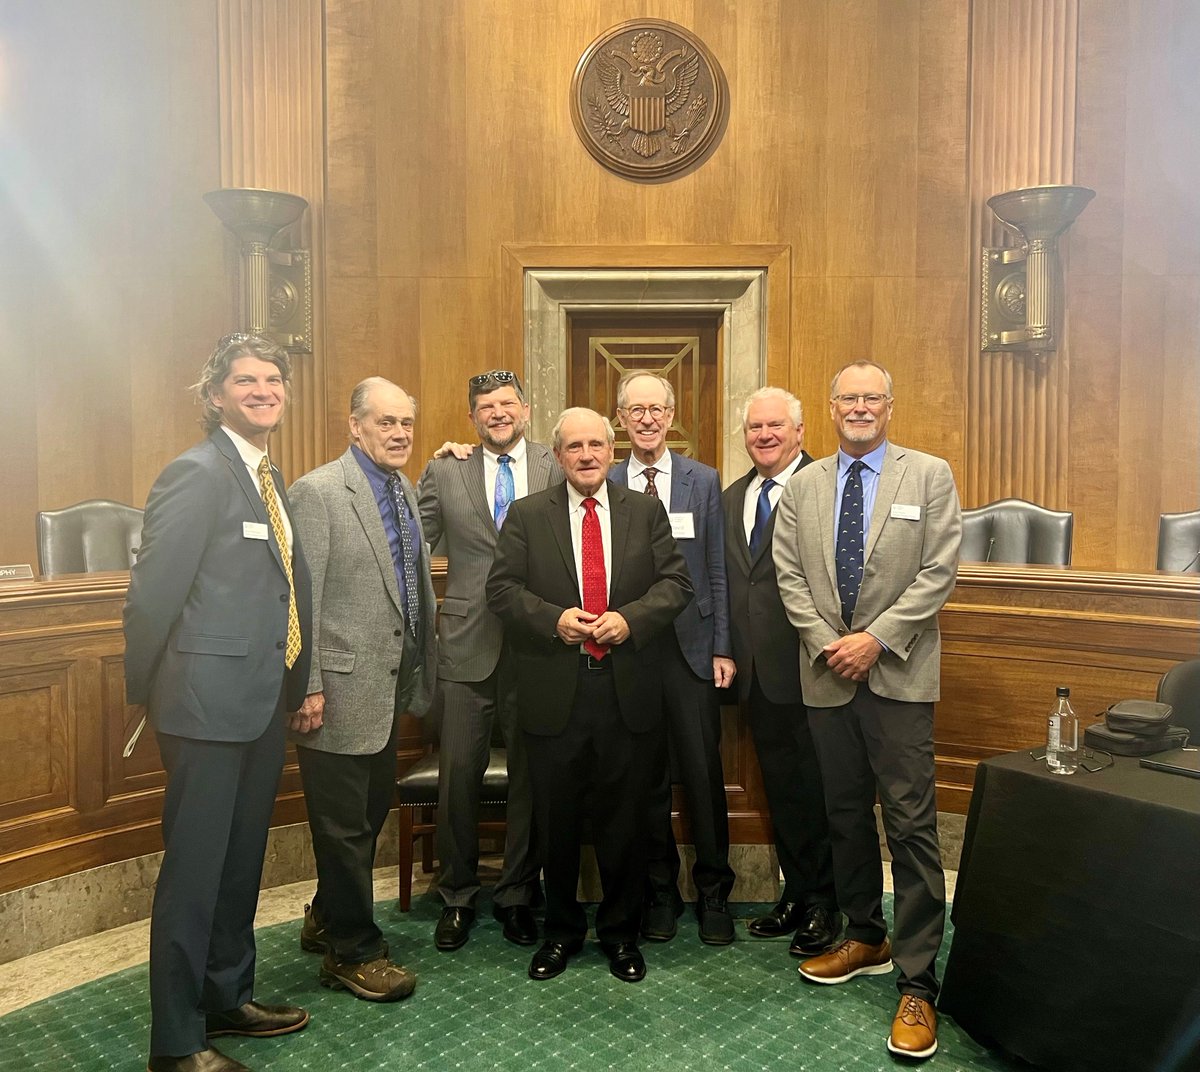 TPL advocates from the Gem State were on Capitol Hill yesterday. Grateful for the opportunity to meet with @SenatorRisch to share how the #OutdoorsForAll Act & #CommunitySchoolyards legislation can improve the health & well-being of people in Idaho. #TPLadvocacy #WeAreTPL